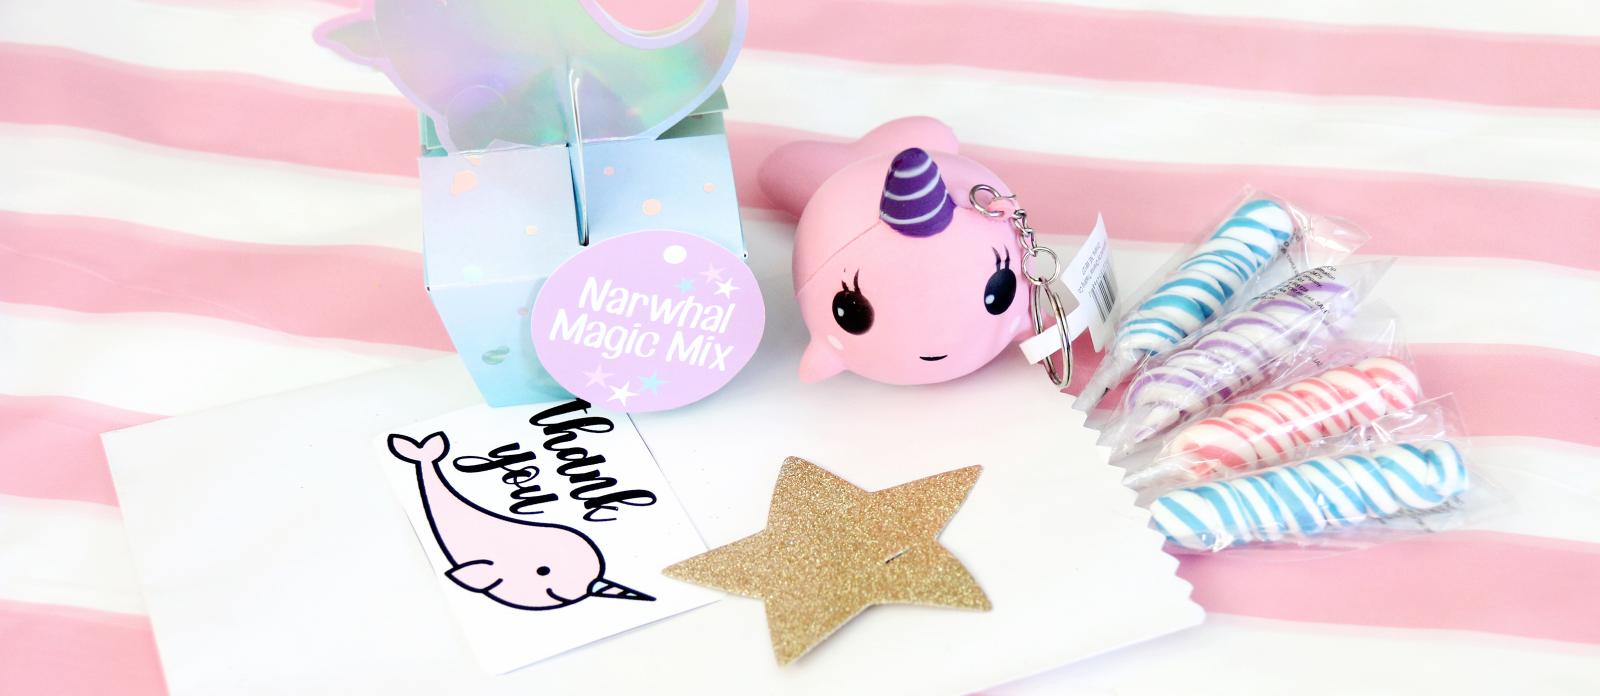 Narwhal Stickers x 5 Whale Stickers Narwhal Birthday Party Favours Loot Idea